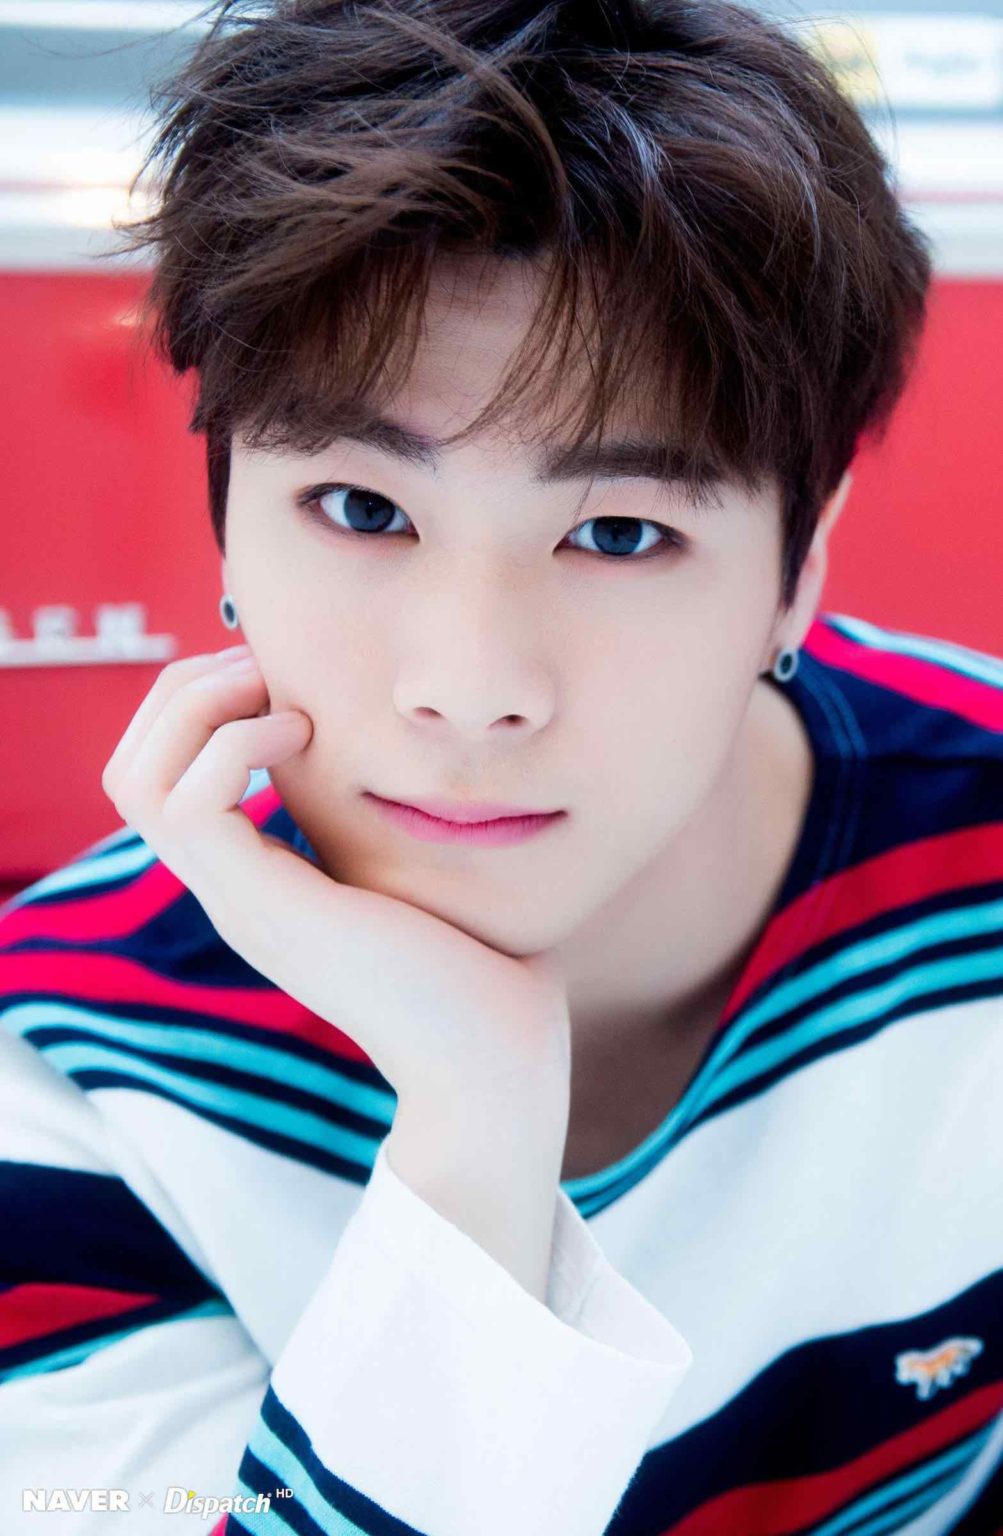 If the rumors are true, Moonbin will star in the new web series 'The Mermaid Prince'. Here's everything we know about Moonbin's potential role.